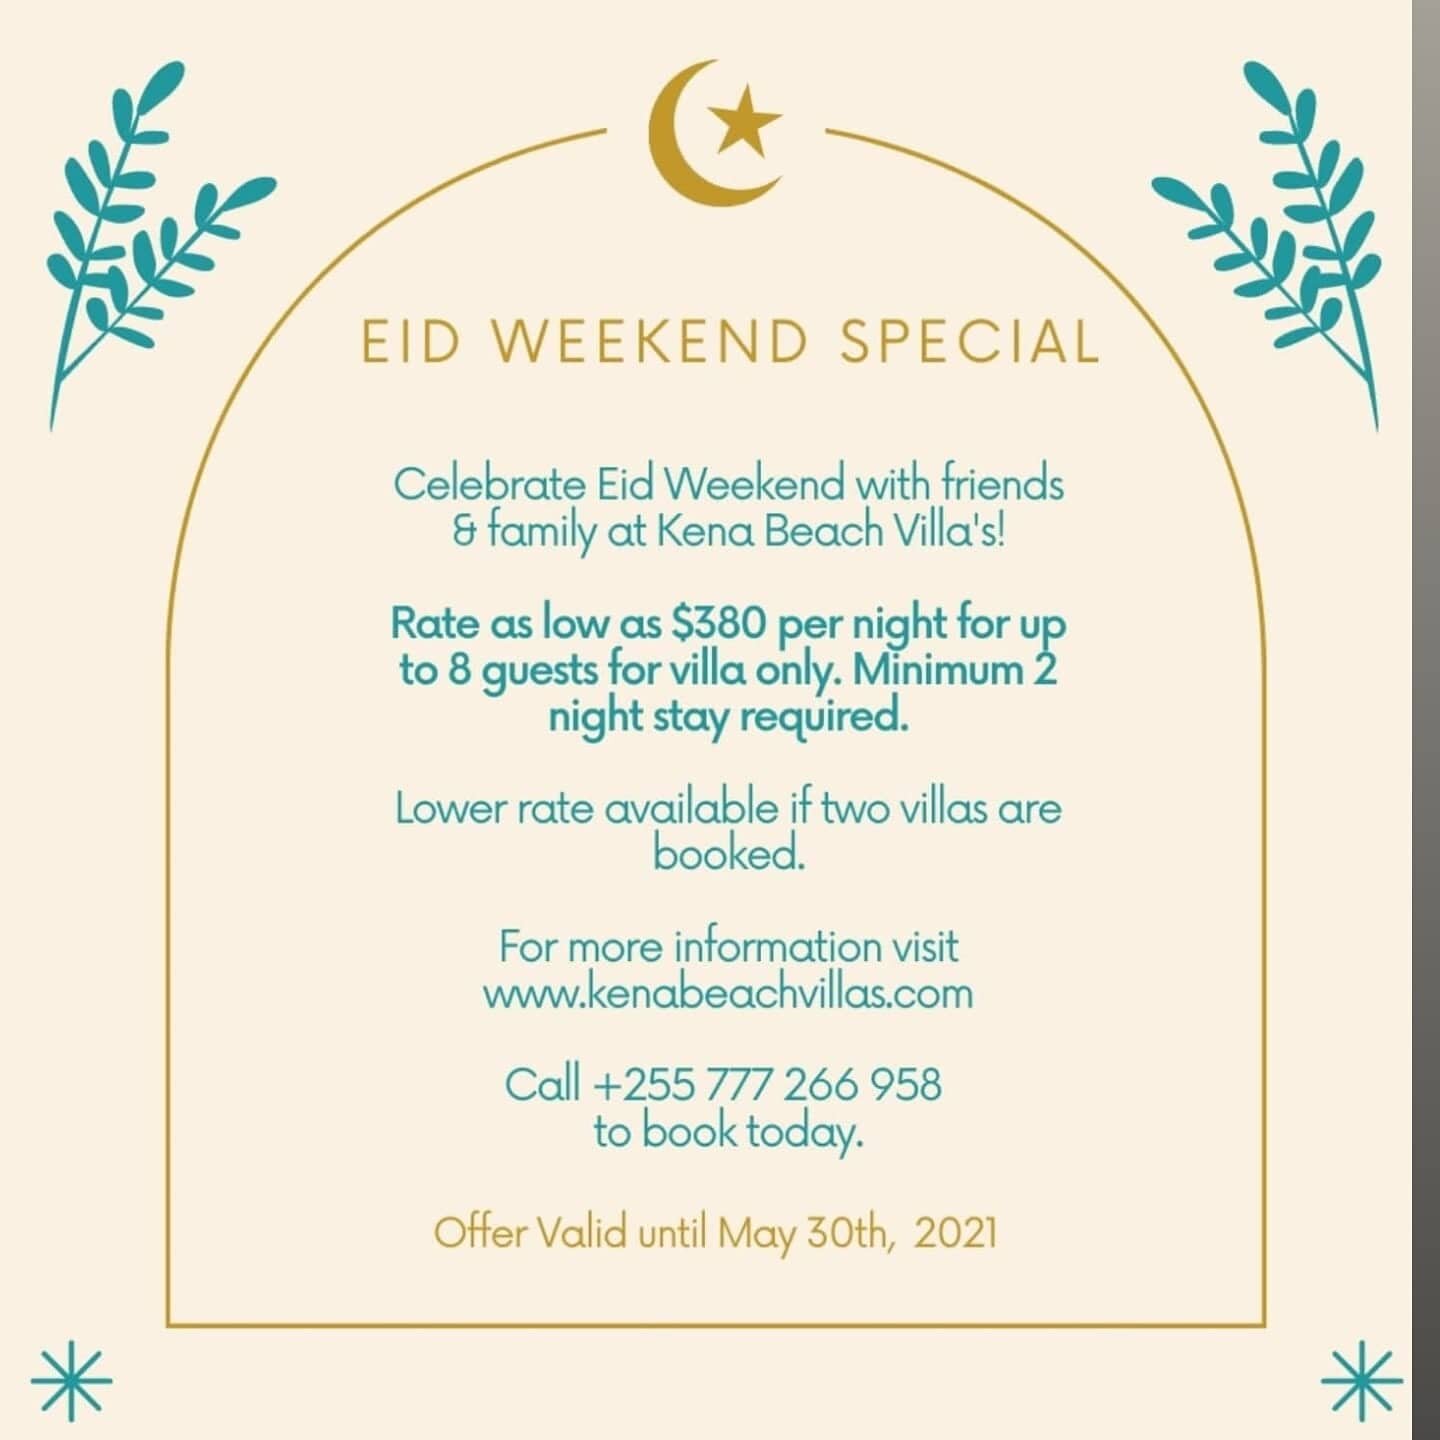 Eid Special at Kena Beach Villa's!🎇 

Book with us today